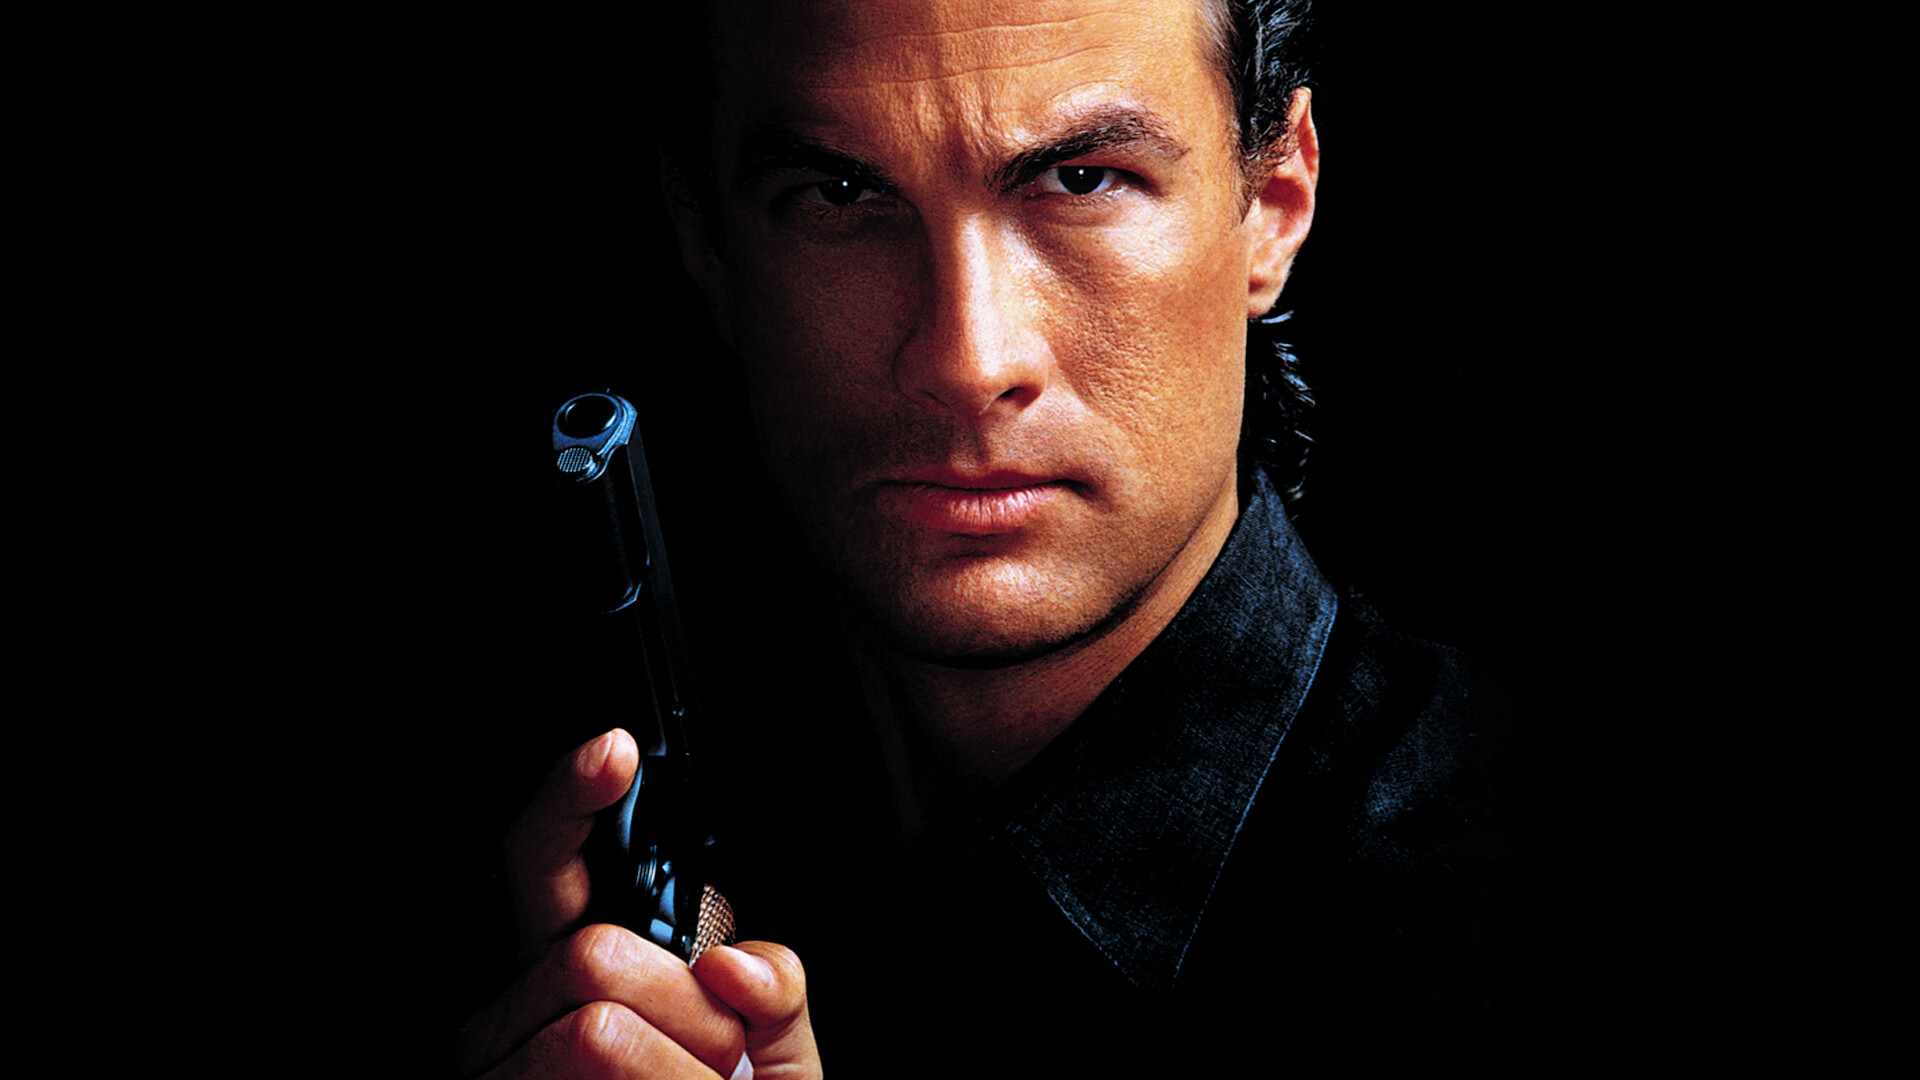 Steven Seagal: Hard to Kill, A 1990 American action thriller film, Directed by Bruce Malmuth, Seagal's second film. 1920x1080 Full HD Wallpaper.